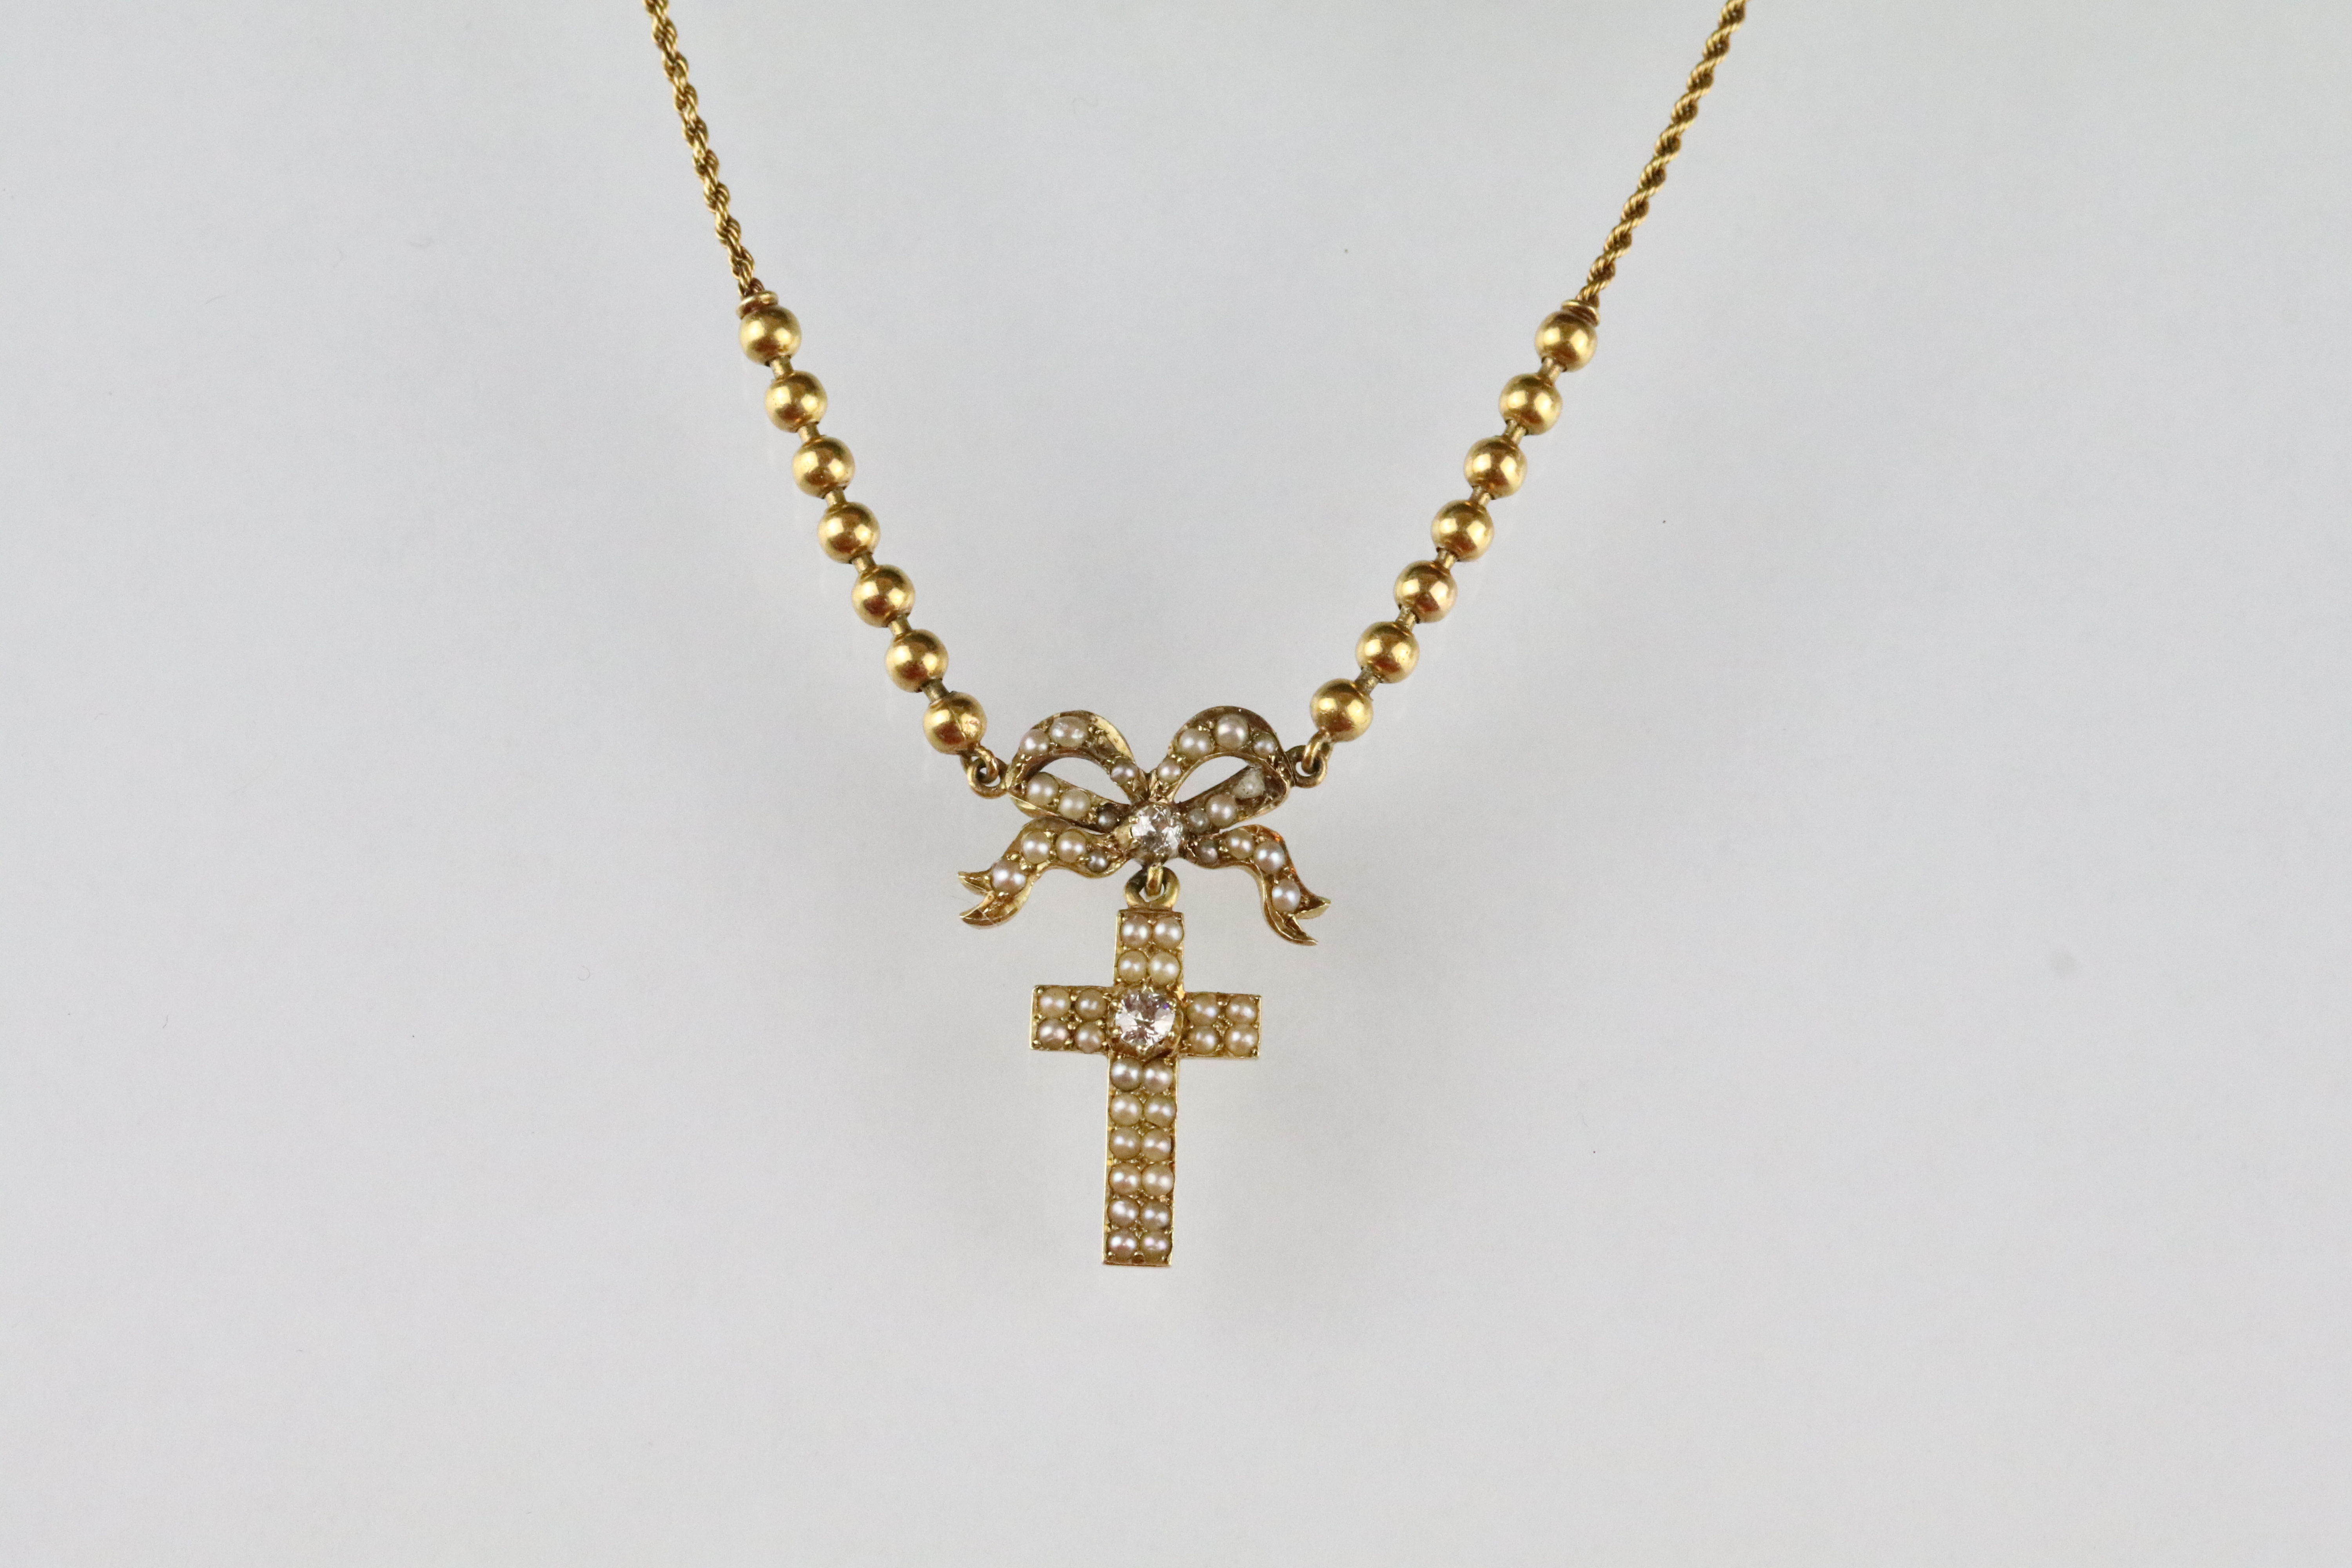 Late 19th / early 20th century diamond and seed pearl unmarked yellow gold pendant necklace, the - Image 5 of 5